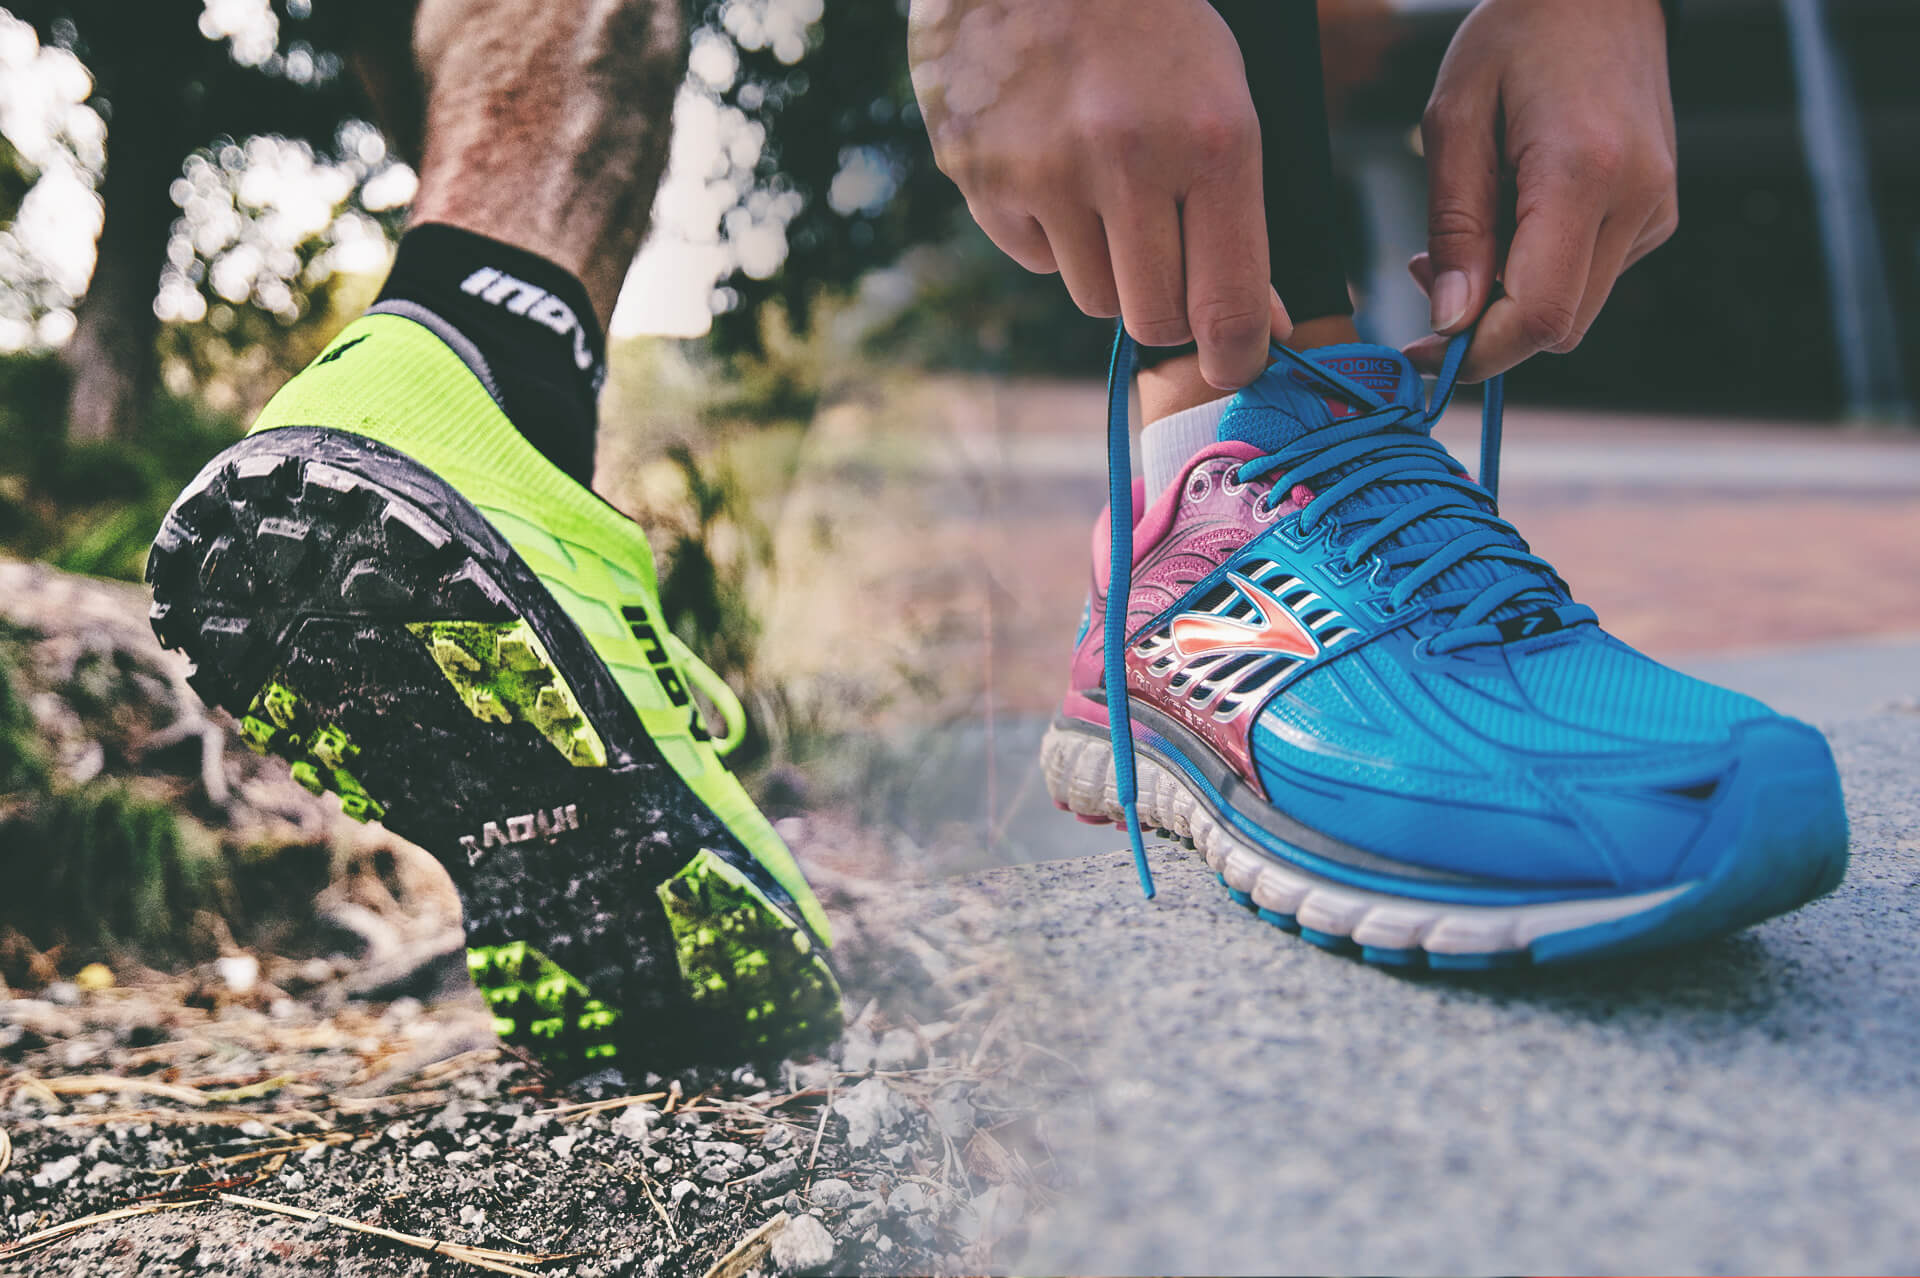 Trail Running Shoes vs. Running Shoes: What's the Difference?.